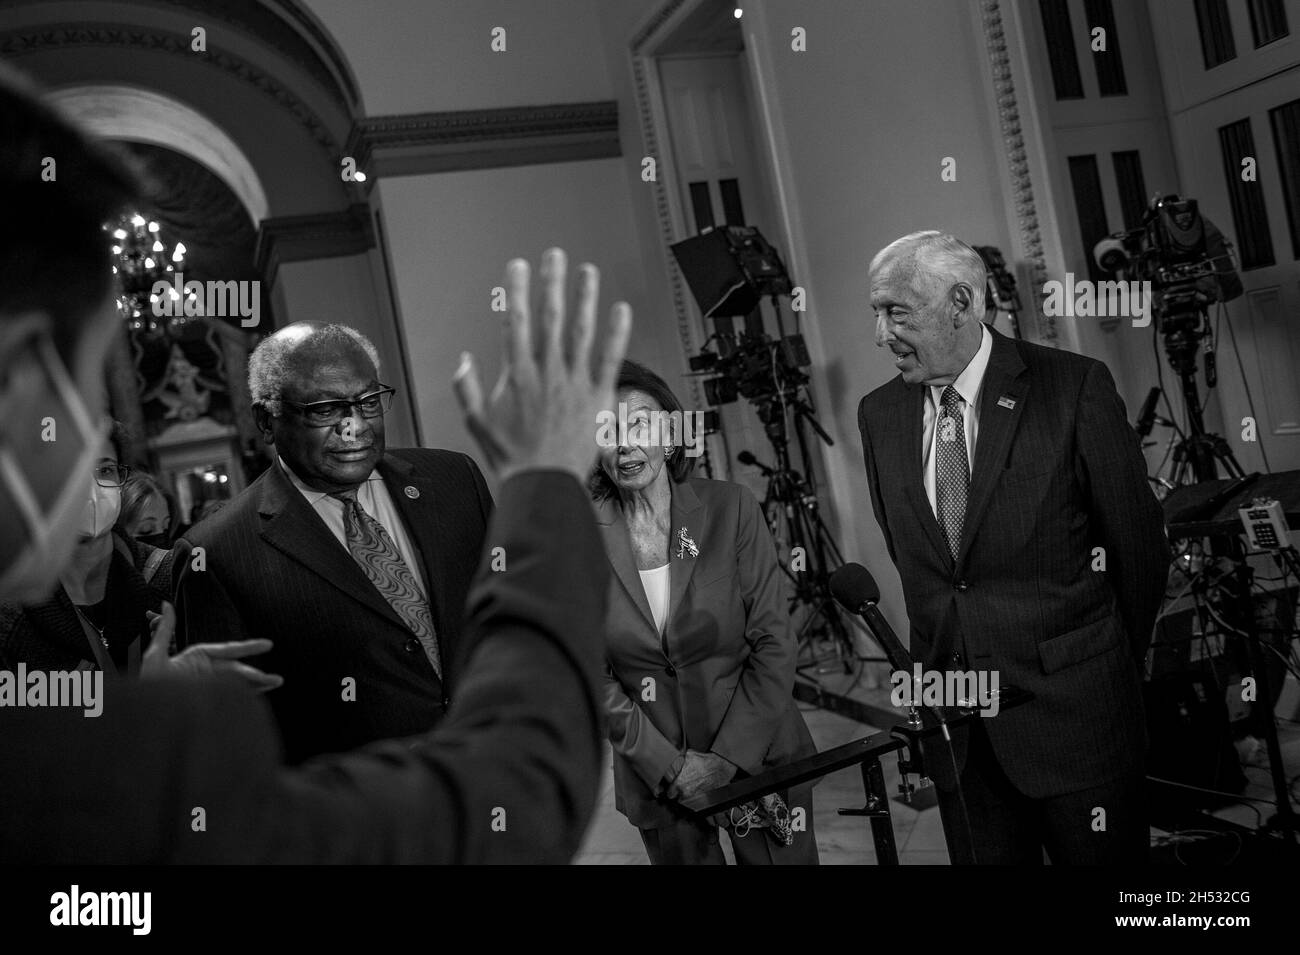 Speaker of the United States House of Representatives Nancy Pelosi (Democrat of California), center, is joined by United States House Majority Whip James Clyburn (Democrat of South Carolina), left, and United States House Majority Leader Steny Hoyer (Democrat of Maryland), right, to offer remarks to reporters as the House of Representatives prepares to vote on the Build Back Better and bipartisan Infrastructure bills at the US Capitol in Washington, DC, Friday, November 5, 2021. Credit: Rod Lamkey/CNP Stock Photo